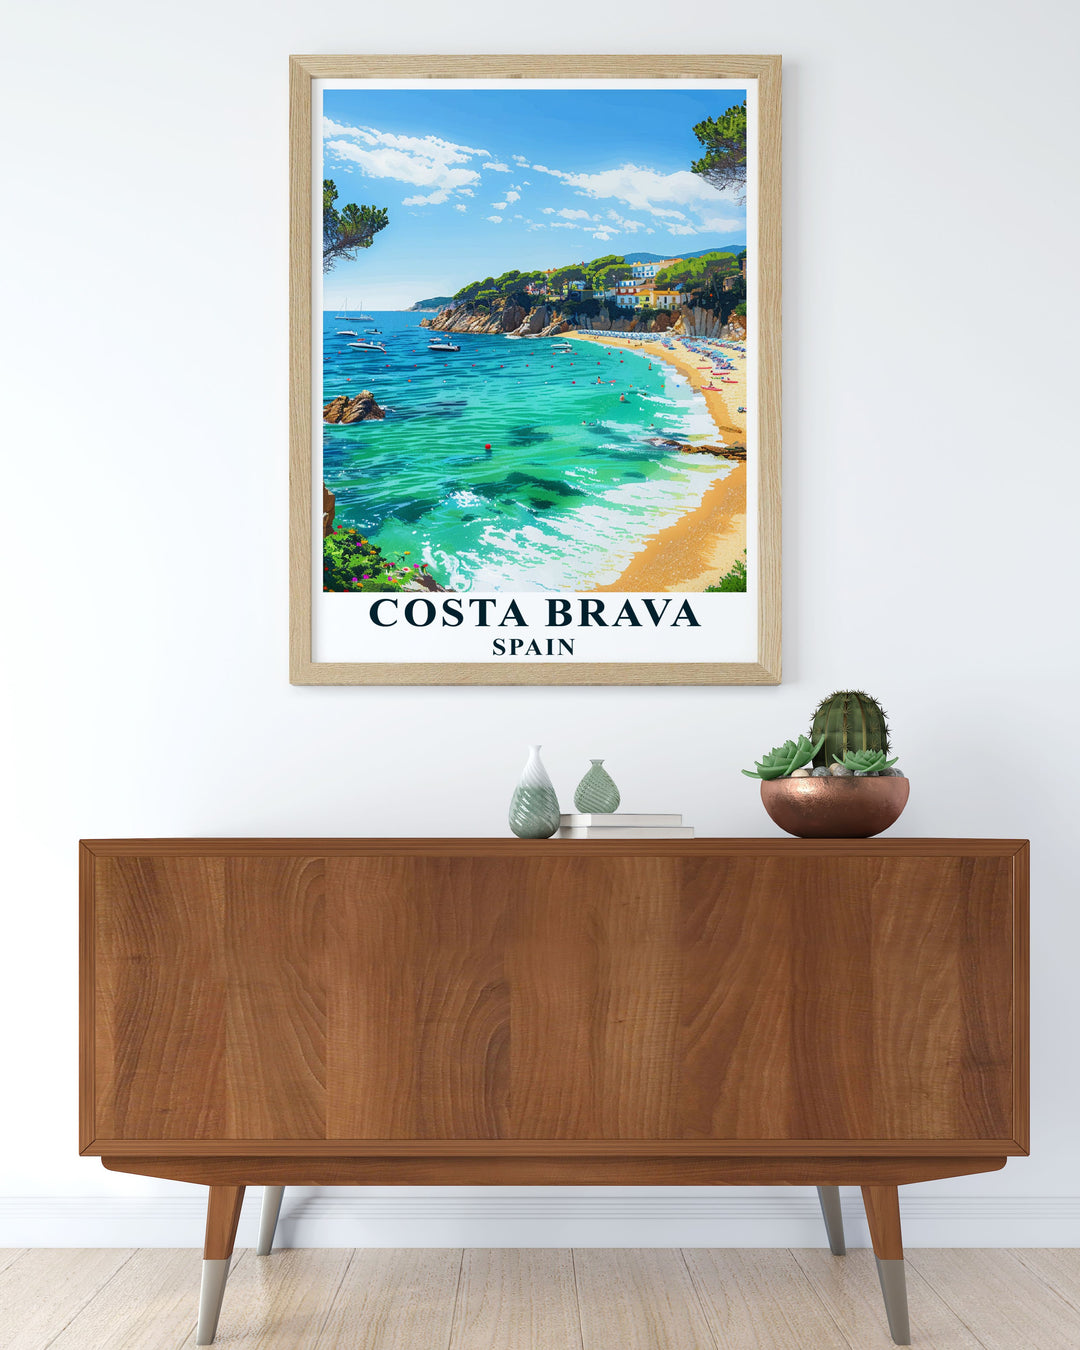 Experience the charm of Spains Costa Brava with a beautiful art print of its picturesque beach. This piece brings the natural splendor and tranquil vibes of the Mediterranean coast into your home.